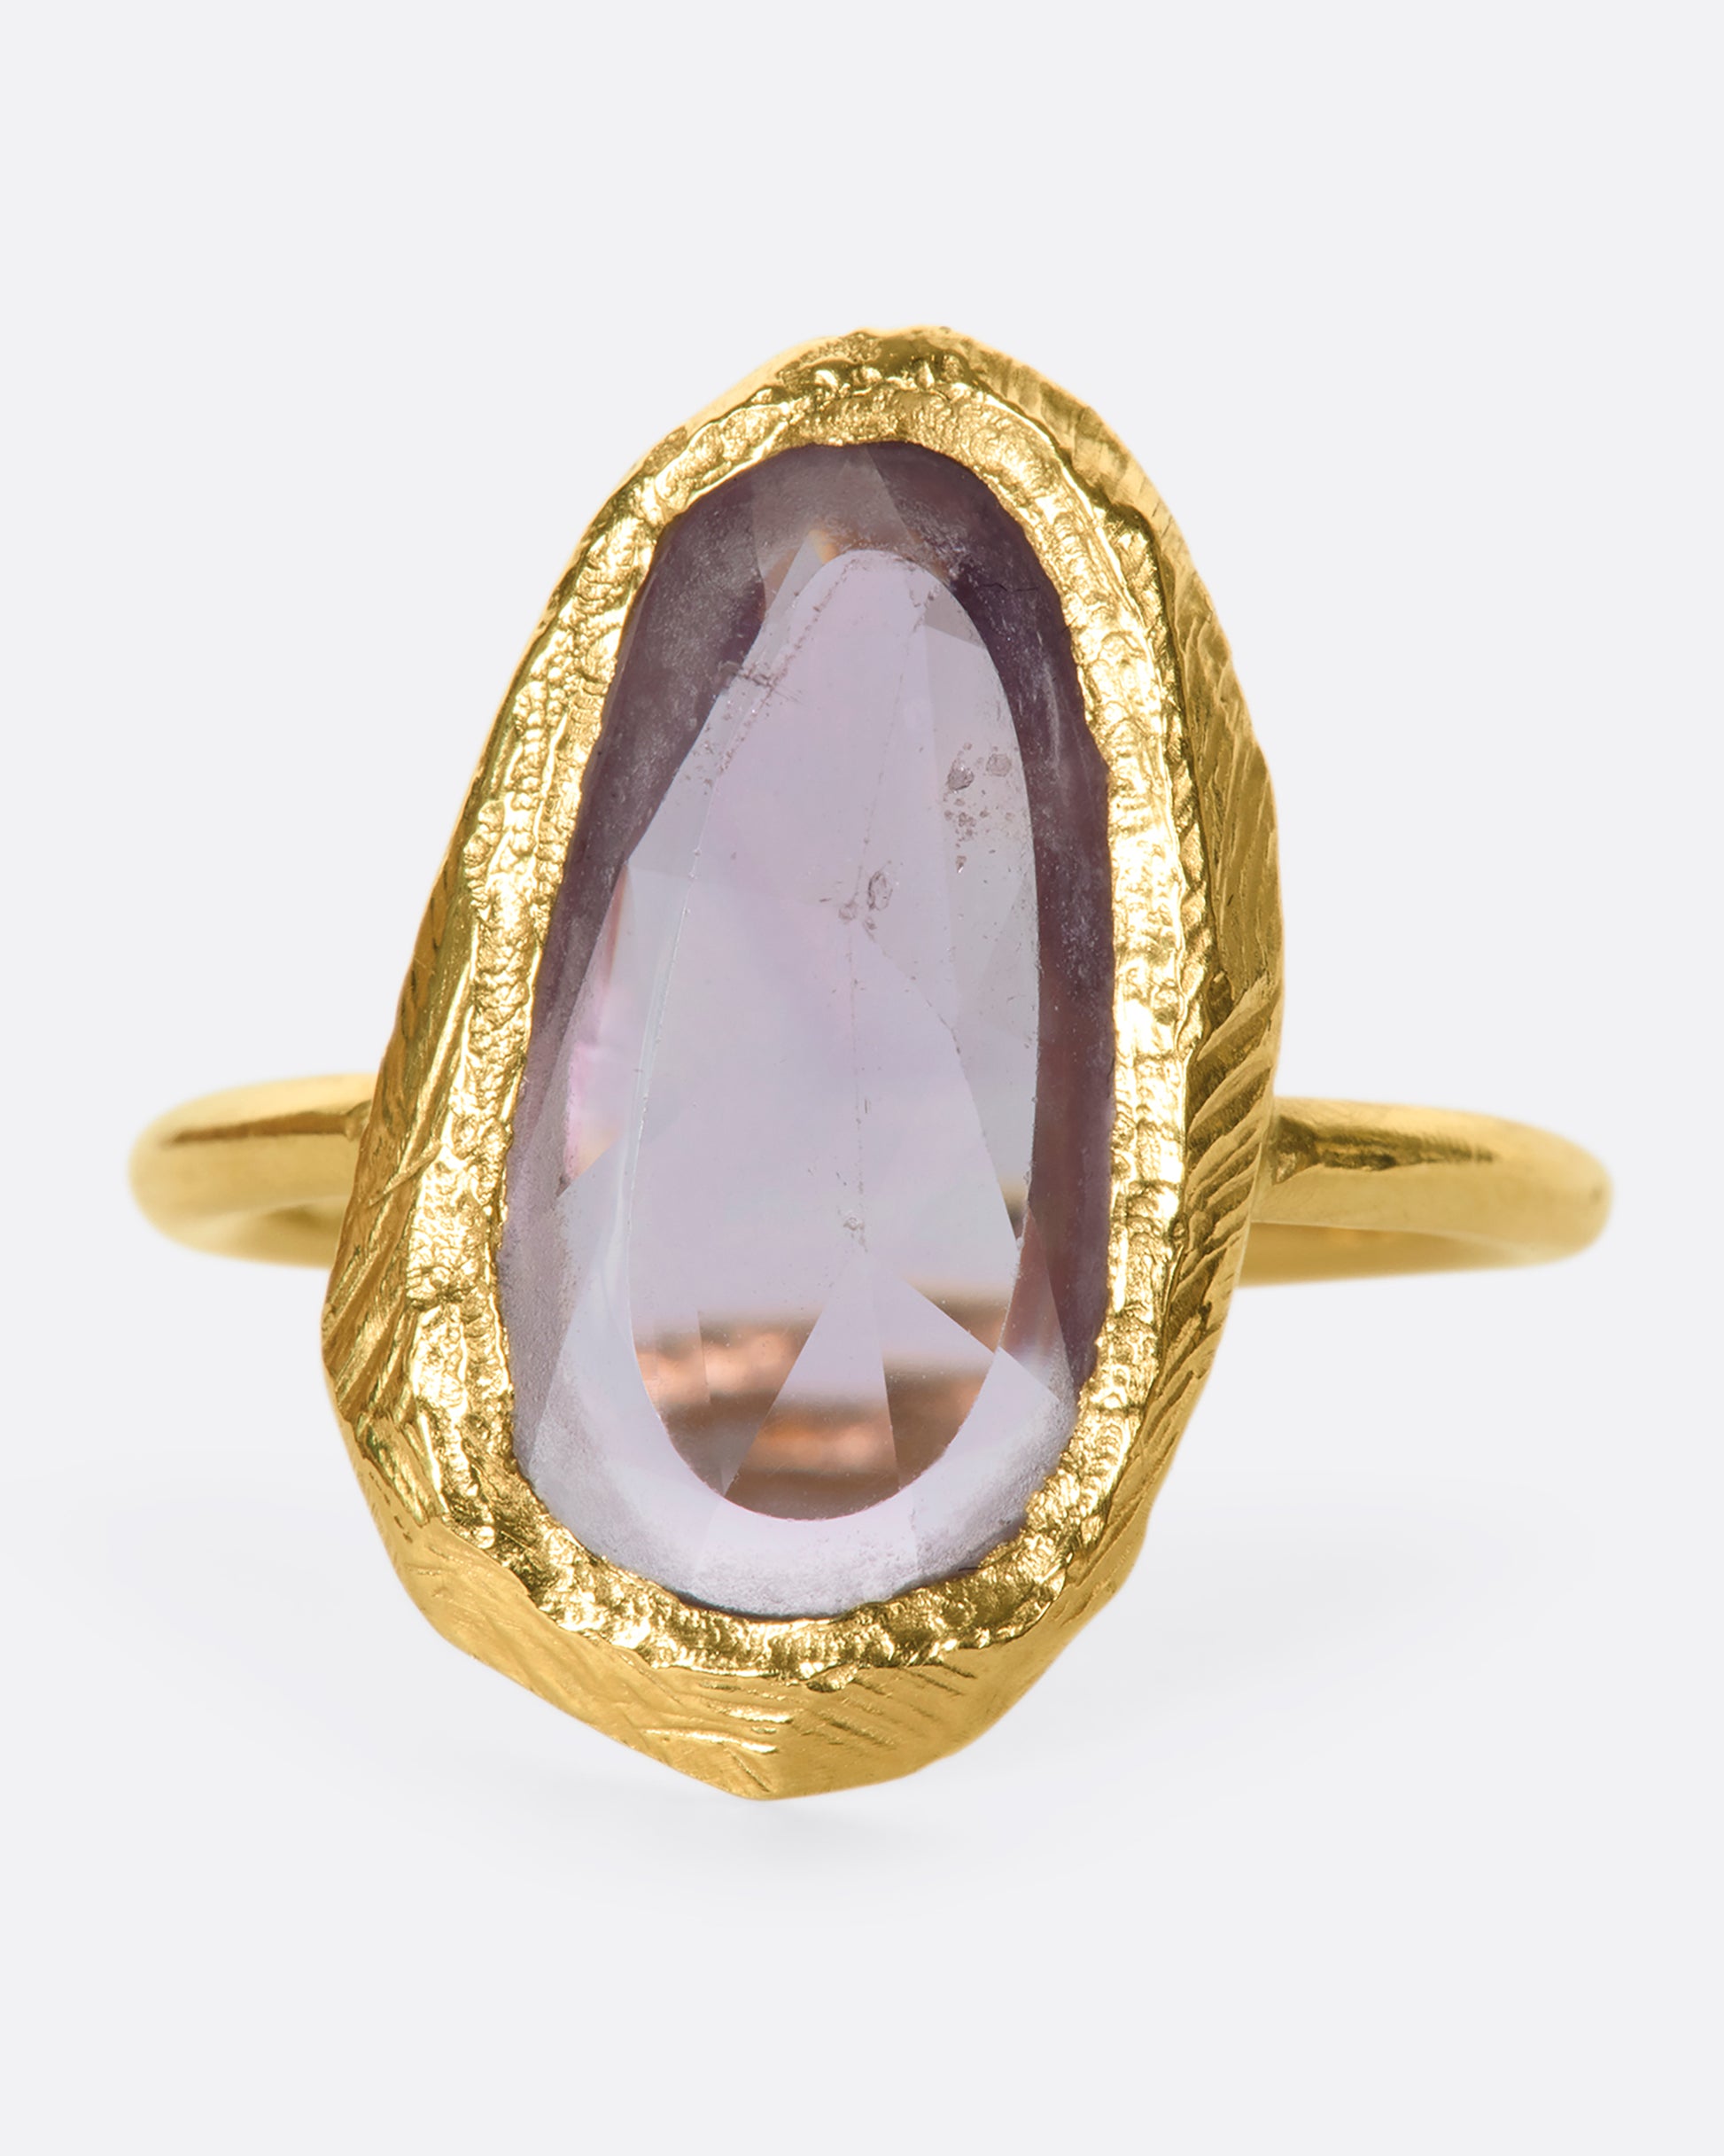 This truly unique freeform, rose-cut purple sapphire is nestled in a hand-carved 18k gold bezel setting